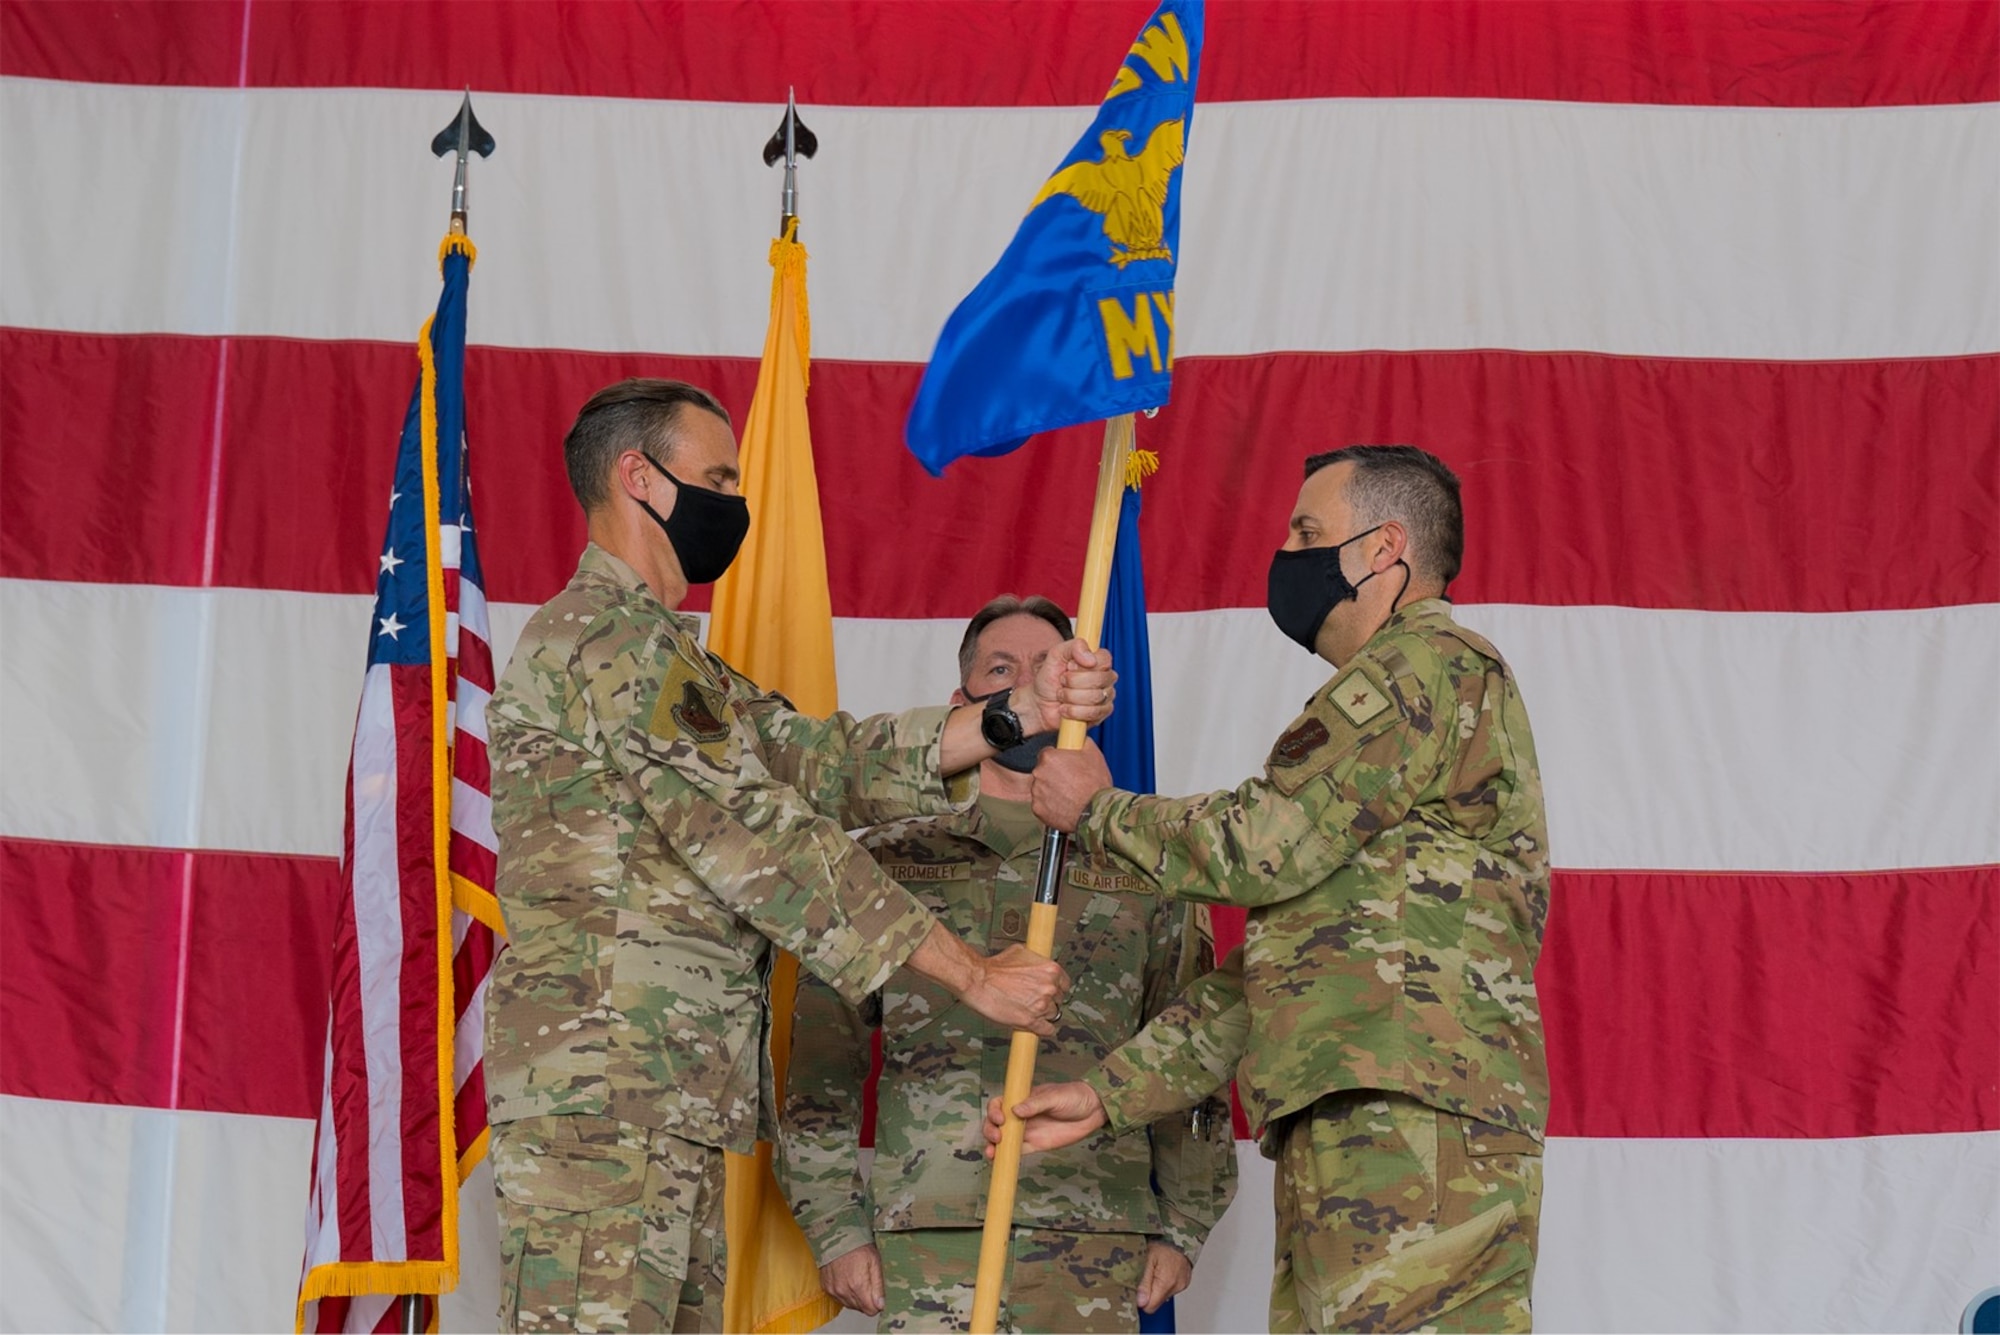 A colonel in uniform hands a command flag to a lieutenant colonel during a ceremony on a stage.